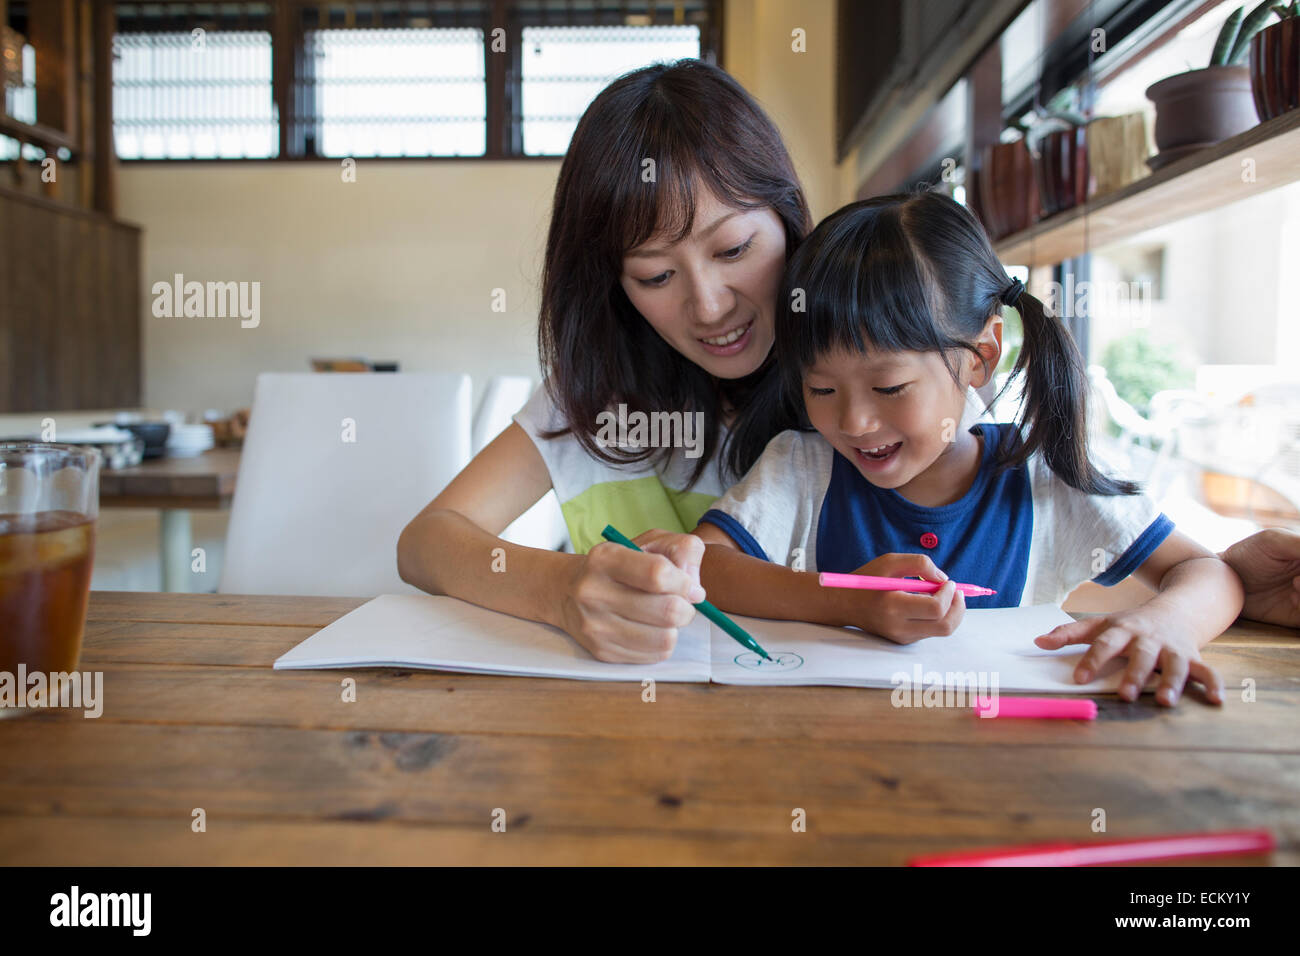 Mother and daughter sitting at a table, drawing with felt tip pens, smiling. Stock Photo